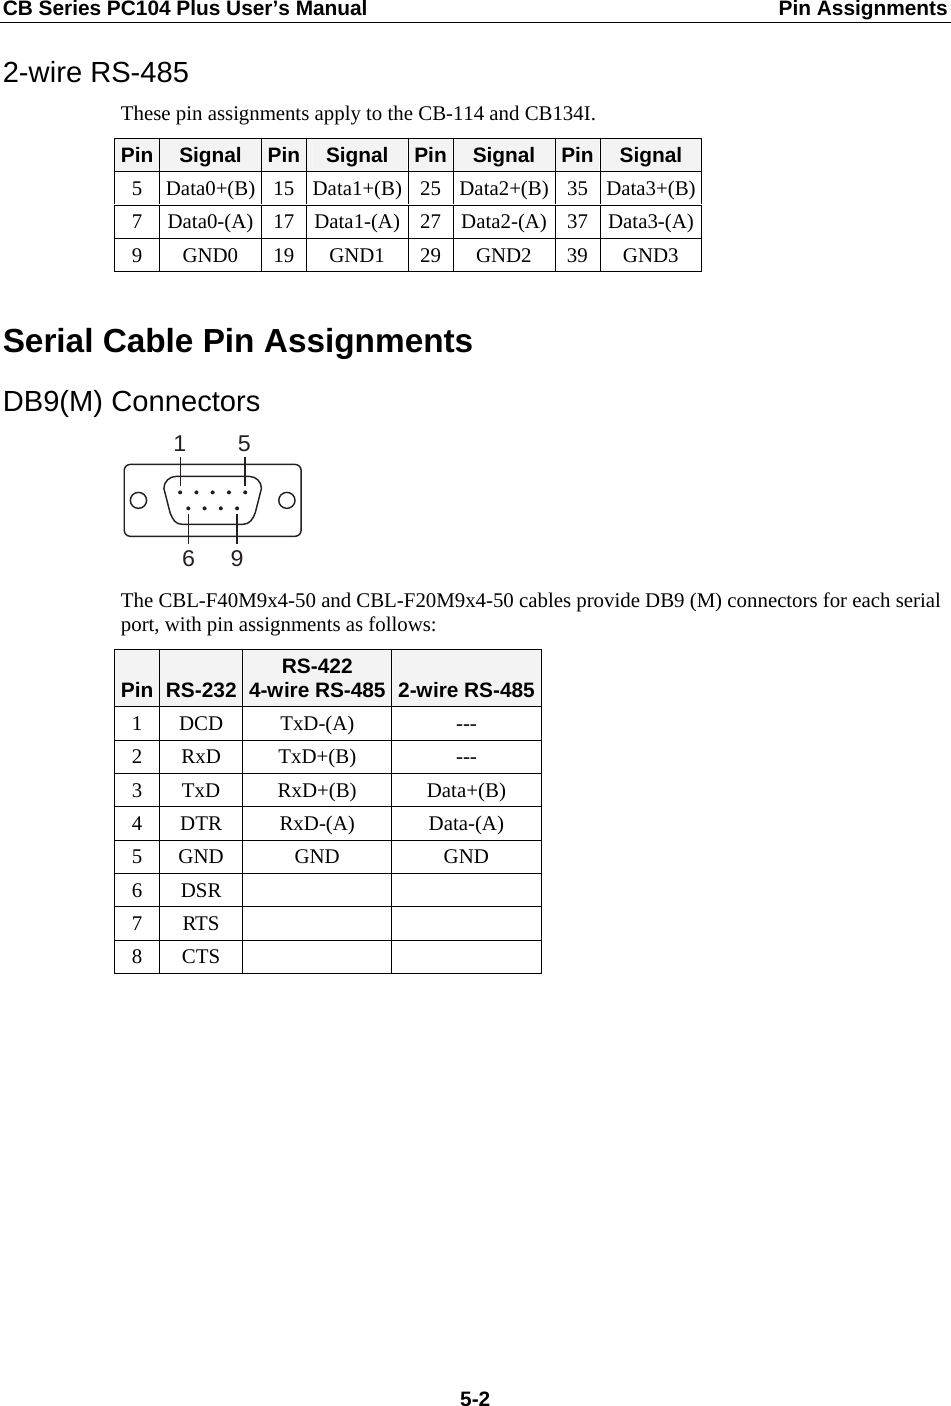 CB Series PC104 Plus User’s Manual  Pin Assignments 2-wire RS-485 These pin assignments apply to the CB-114 and CB134I. Pin  Signal  Pin  Signal  Pin Signal  Pin Signal 5 Data0+(B) 15 Data1+(B) 25 Data2+(B) 35 Data3+(B)7  Data0-(A) 17 Data1-(A) 27 Data2-(A) 37 Data3-(A)9  GND0 19 GND1 29 GND2 39 GND3  Serial Cable Pin Assignments DB9(M) Connectors 1569 The CBL-F40M9x4-50 and CBL-F20M9x4-50 cables provide DB9 (M) connectors for each serial port, with pin assignments as follows: Pin  RS-232 RS-422 4-wire RS-485 2-wire RS-4851 DCD  TxD-(A)  --- 2 RxD  TxD+(B)  --- 3 TxD  RxD+(B)  Data+(B) 4 DTR  RxD-(A)  Data-(A) 5 GND GND  GND 6 DSR     7 RTS     8 CTS                5-2